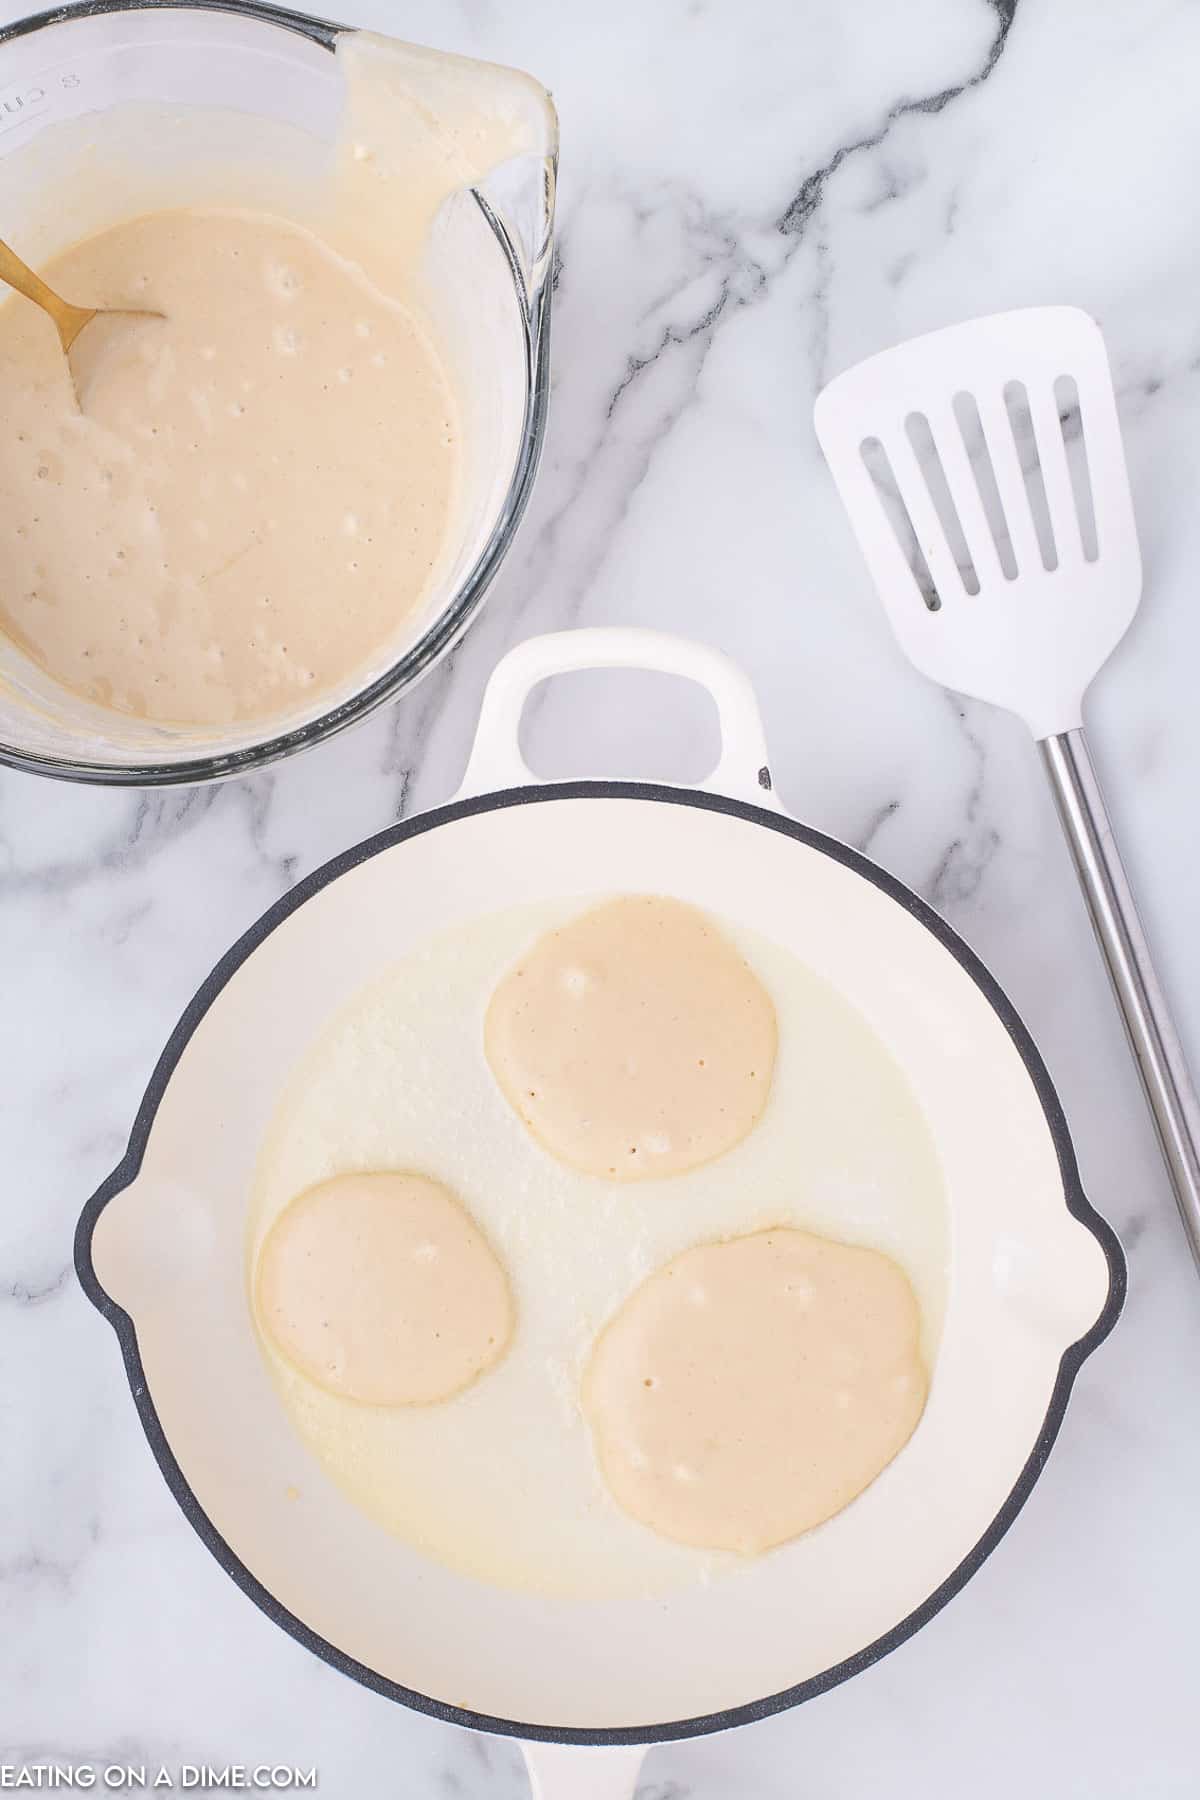 Pouring batter into round circles on a skillet